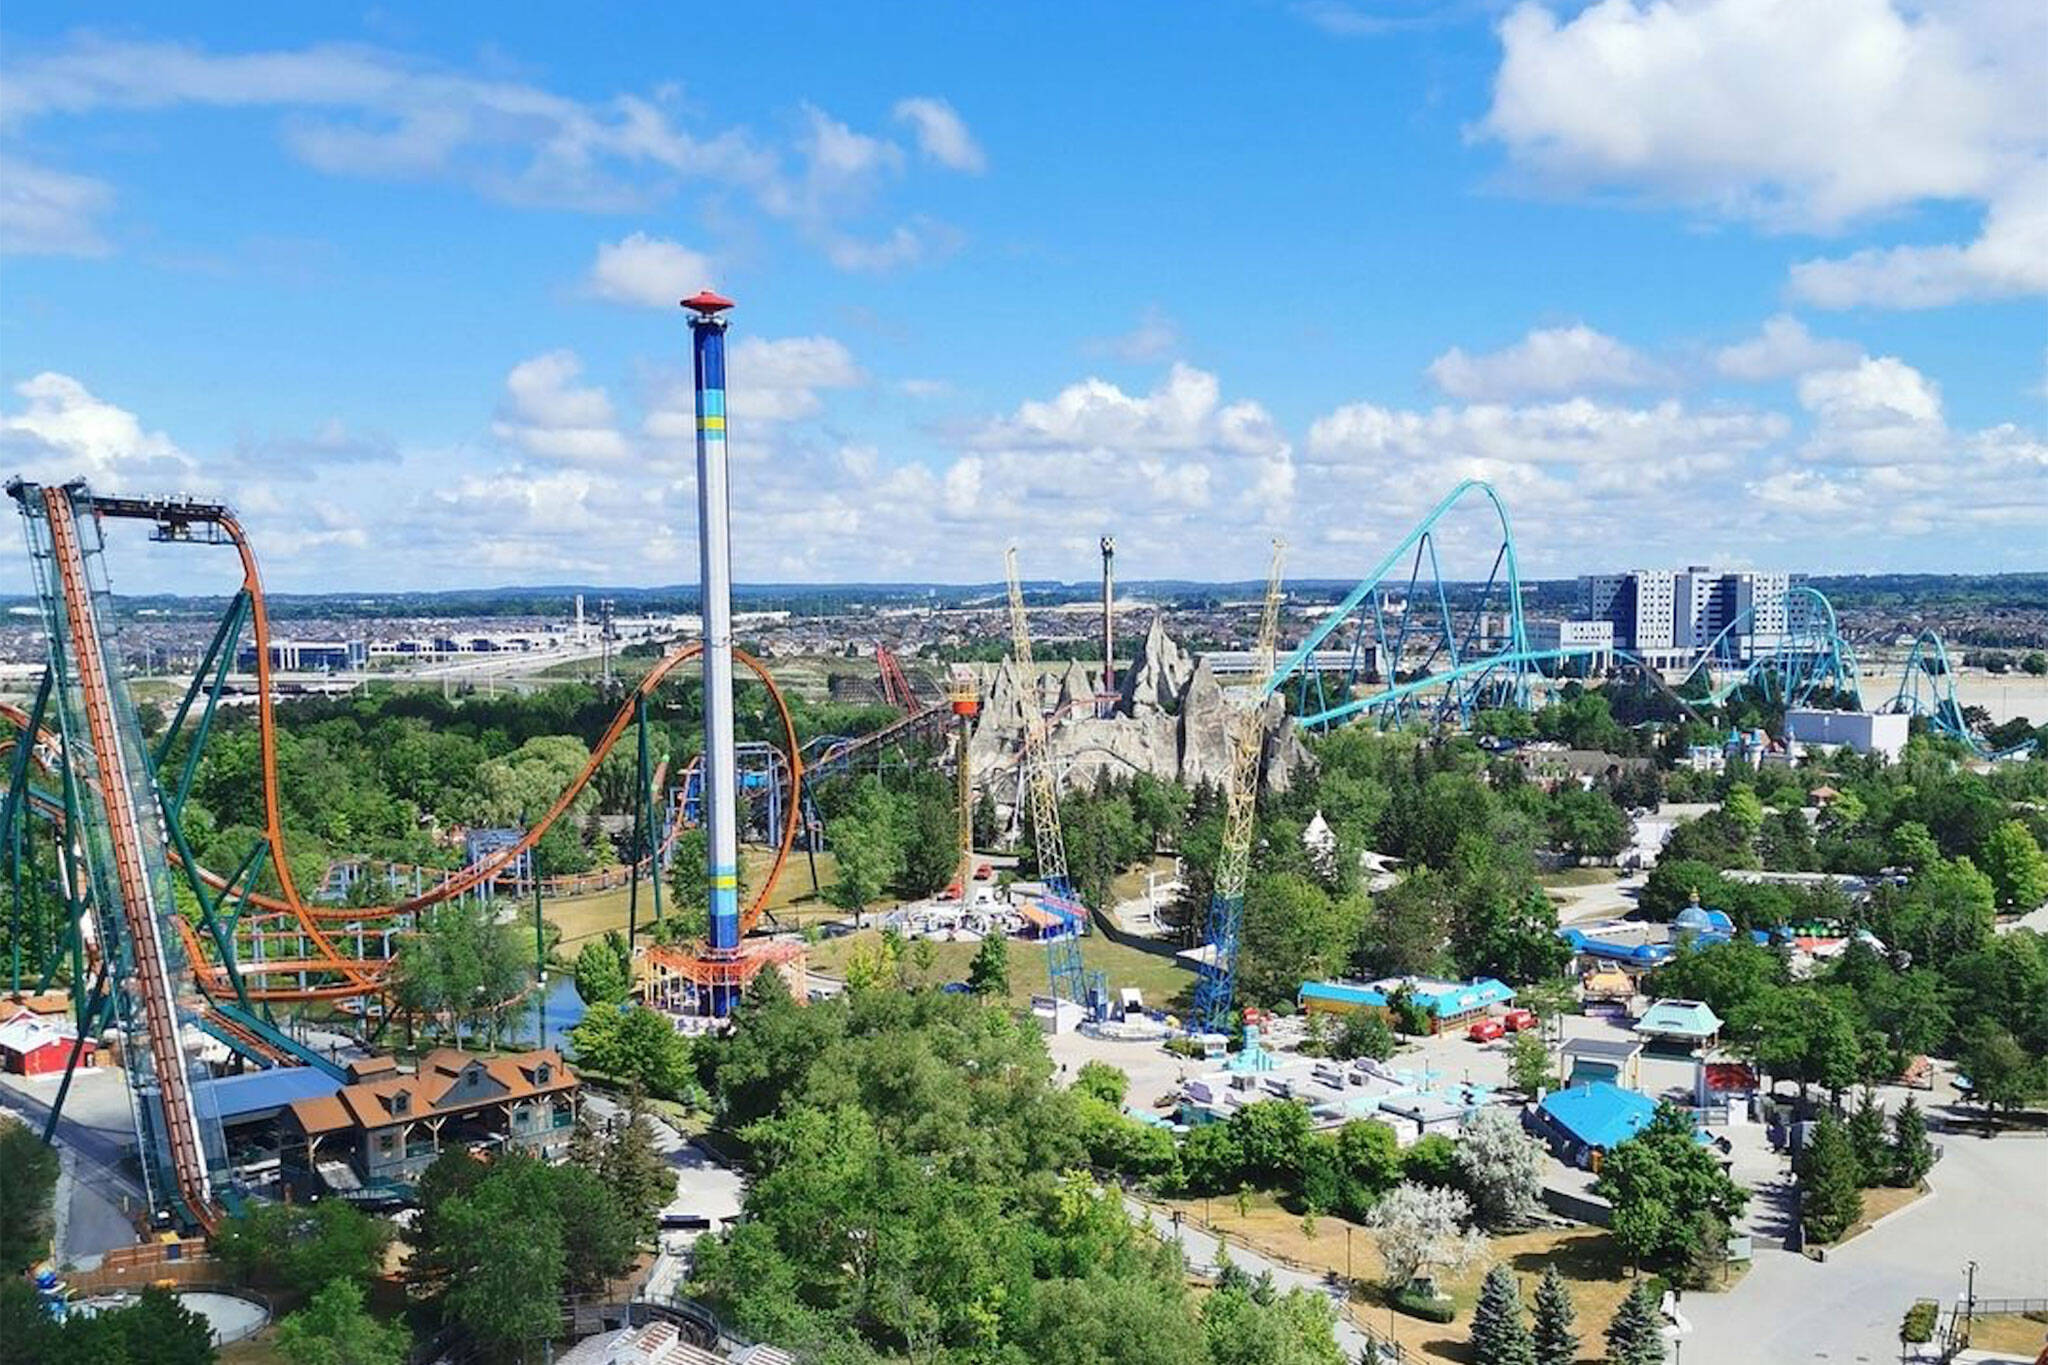 Canada's Wonderland opens its doors for the first time in almost two years